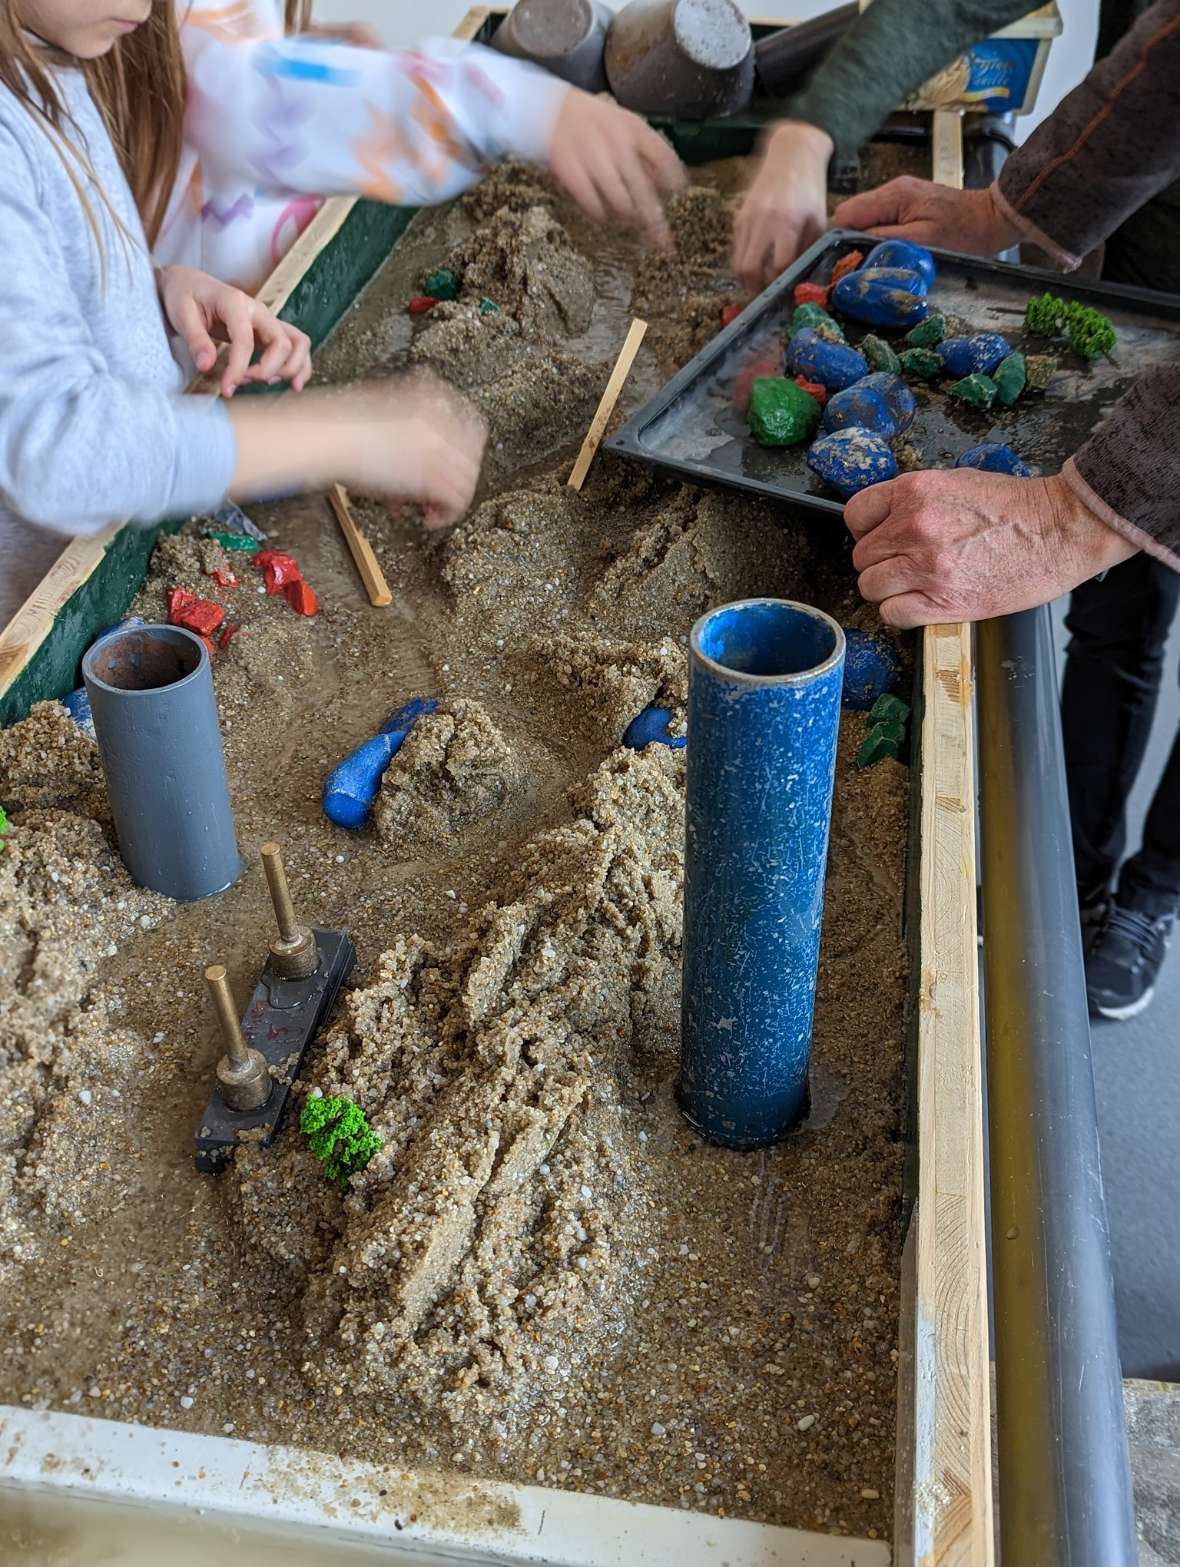 An approximately sixty by two hundred centimetre wooden box is set up inclined and filled with sand. Water runs into the top and drains down through a natural channel in the sand. The water flow can be influenced with coloured stones and small wooden sticks. Six different examples of design can be seen on the photos. Natural, branching courses can be seen, as well as straightening and dams. On some of the examples, children can be seen during the channel design.